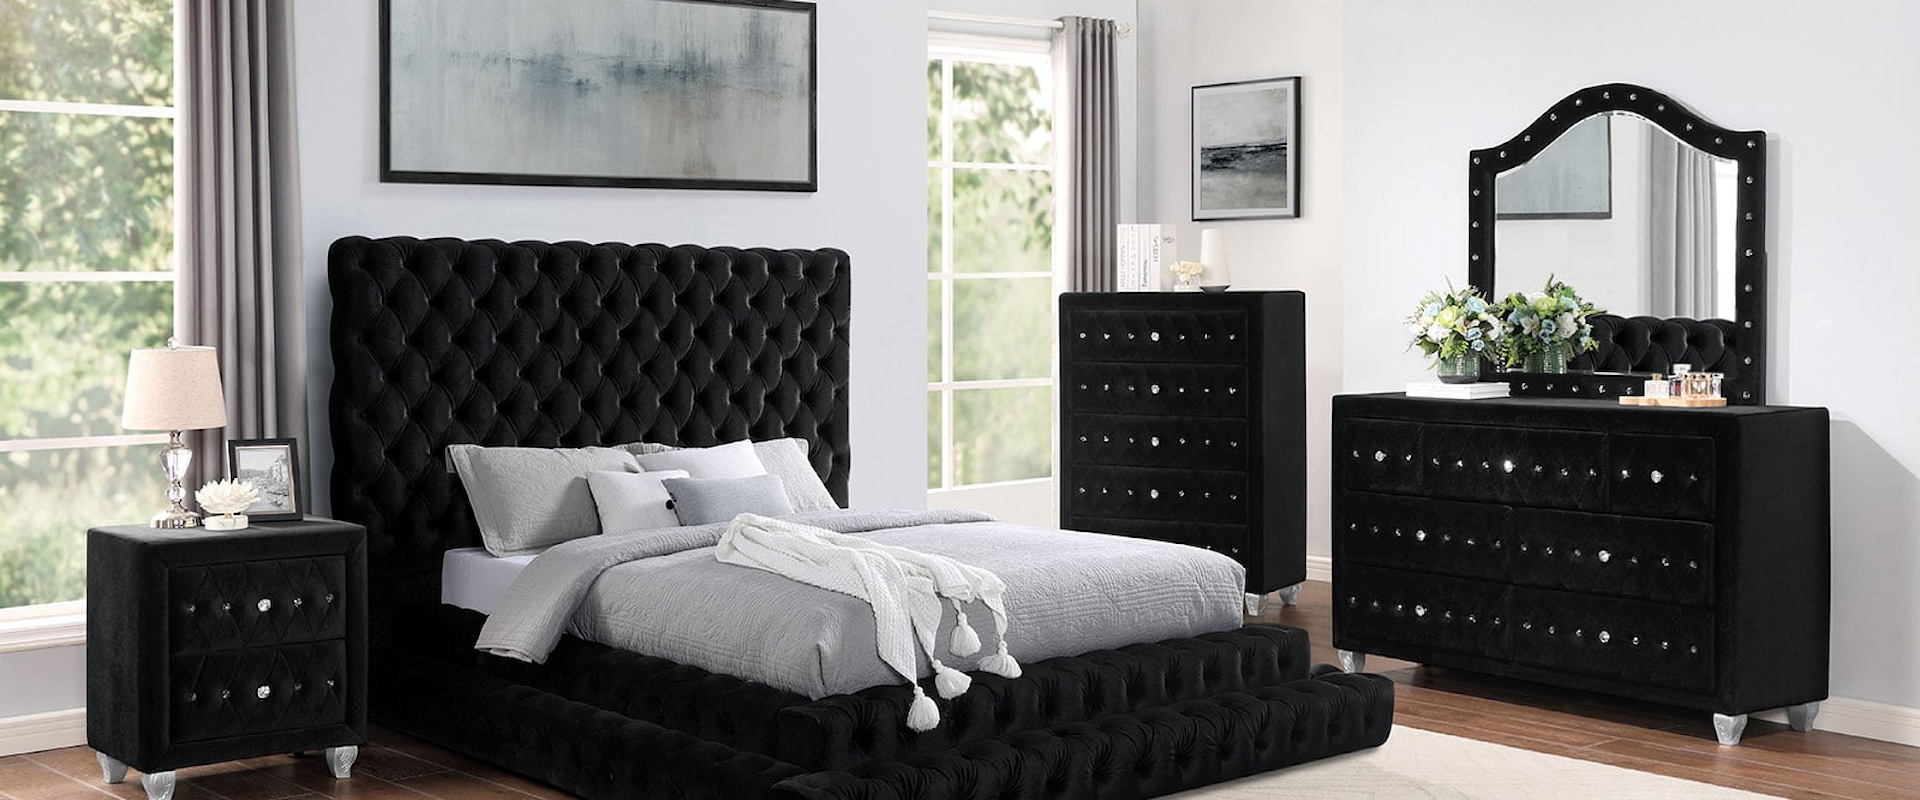 Glam 5-Piece Queen Bedroom Set with Drawer Chest